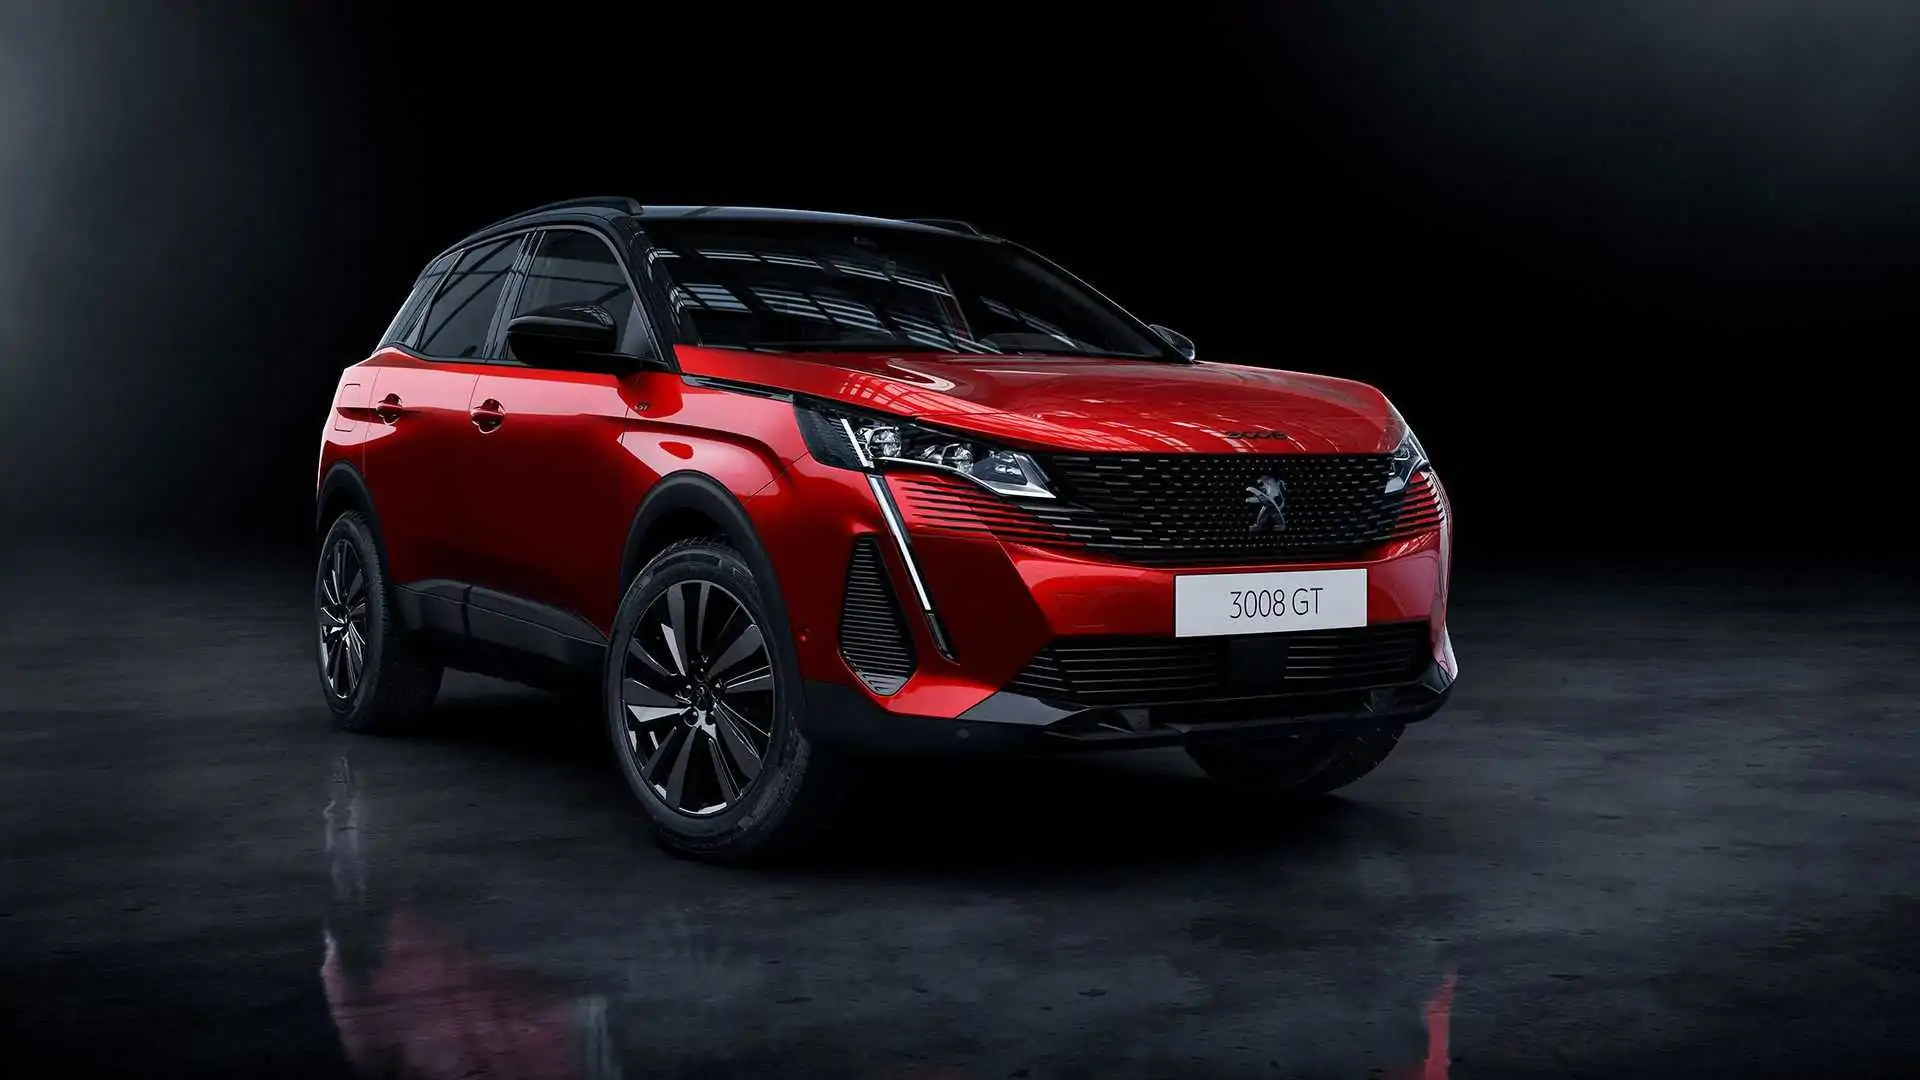 Used Peugeot 3008 SUV with Hybrid engine for sale 